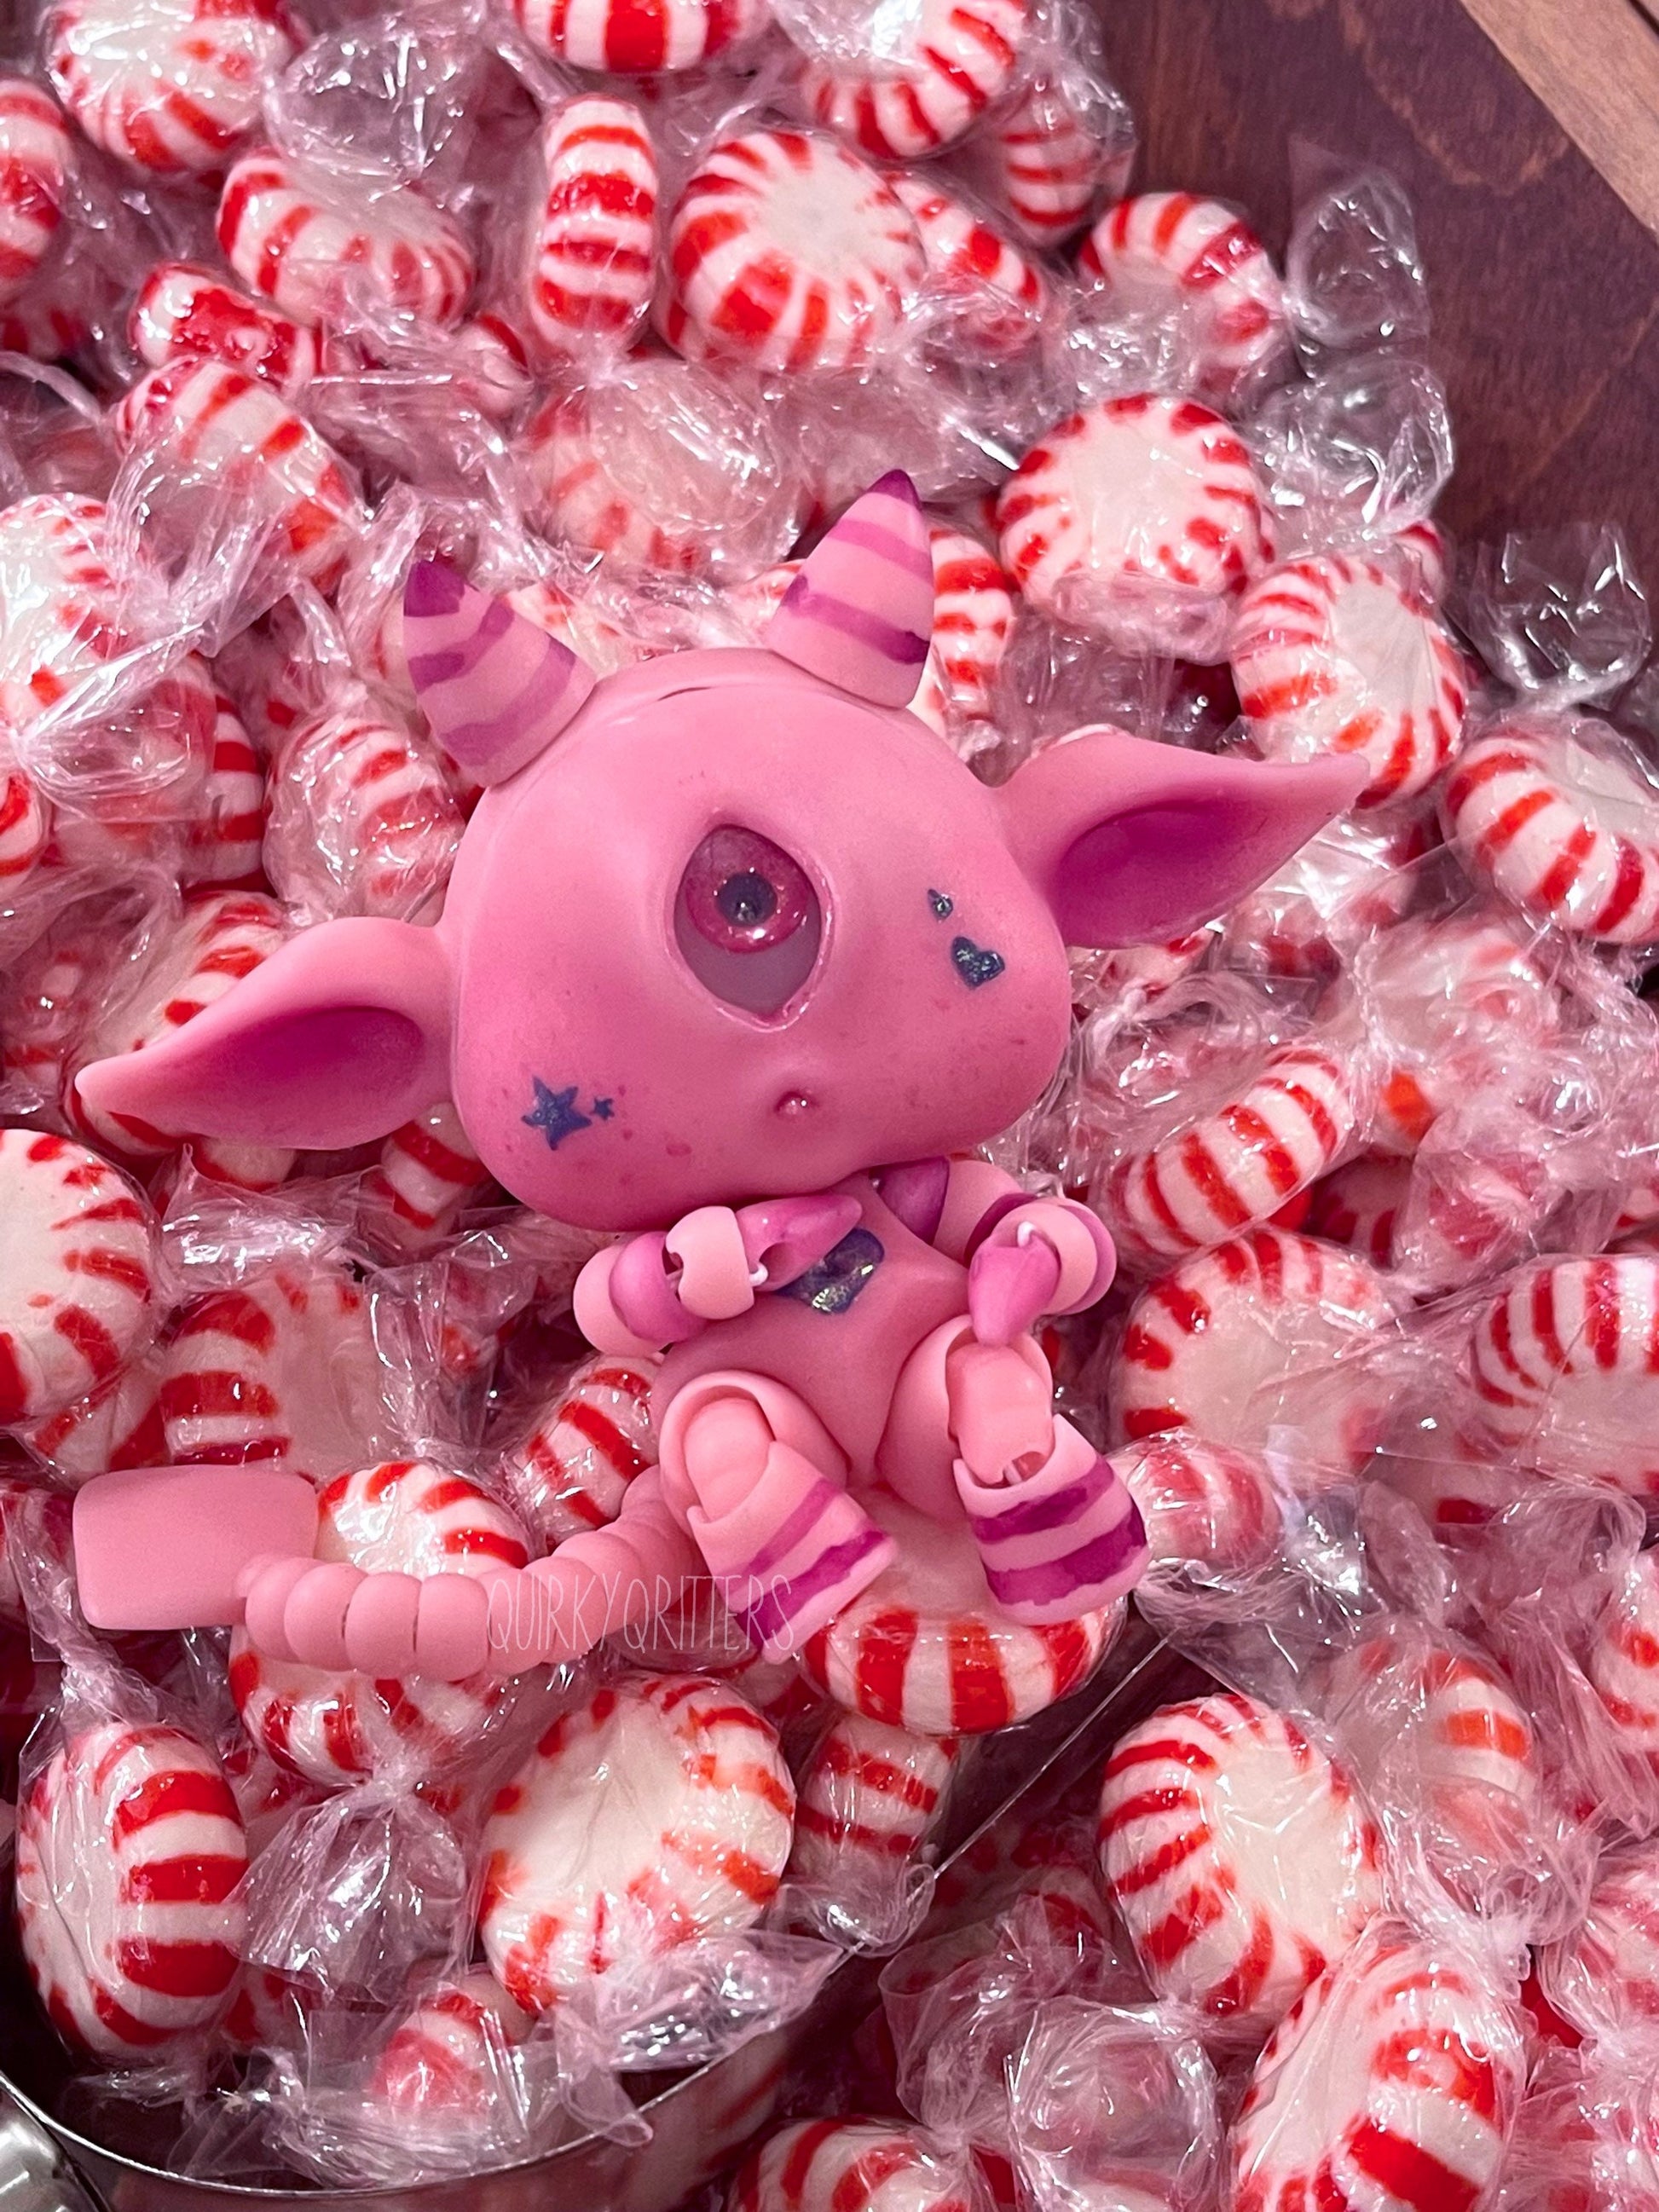 Sugar Imp: The Sweet 3D printed Ball Jointed Doll